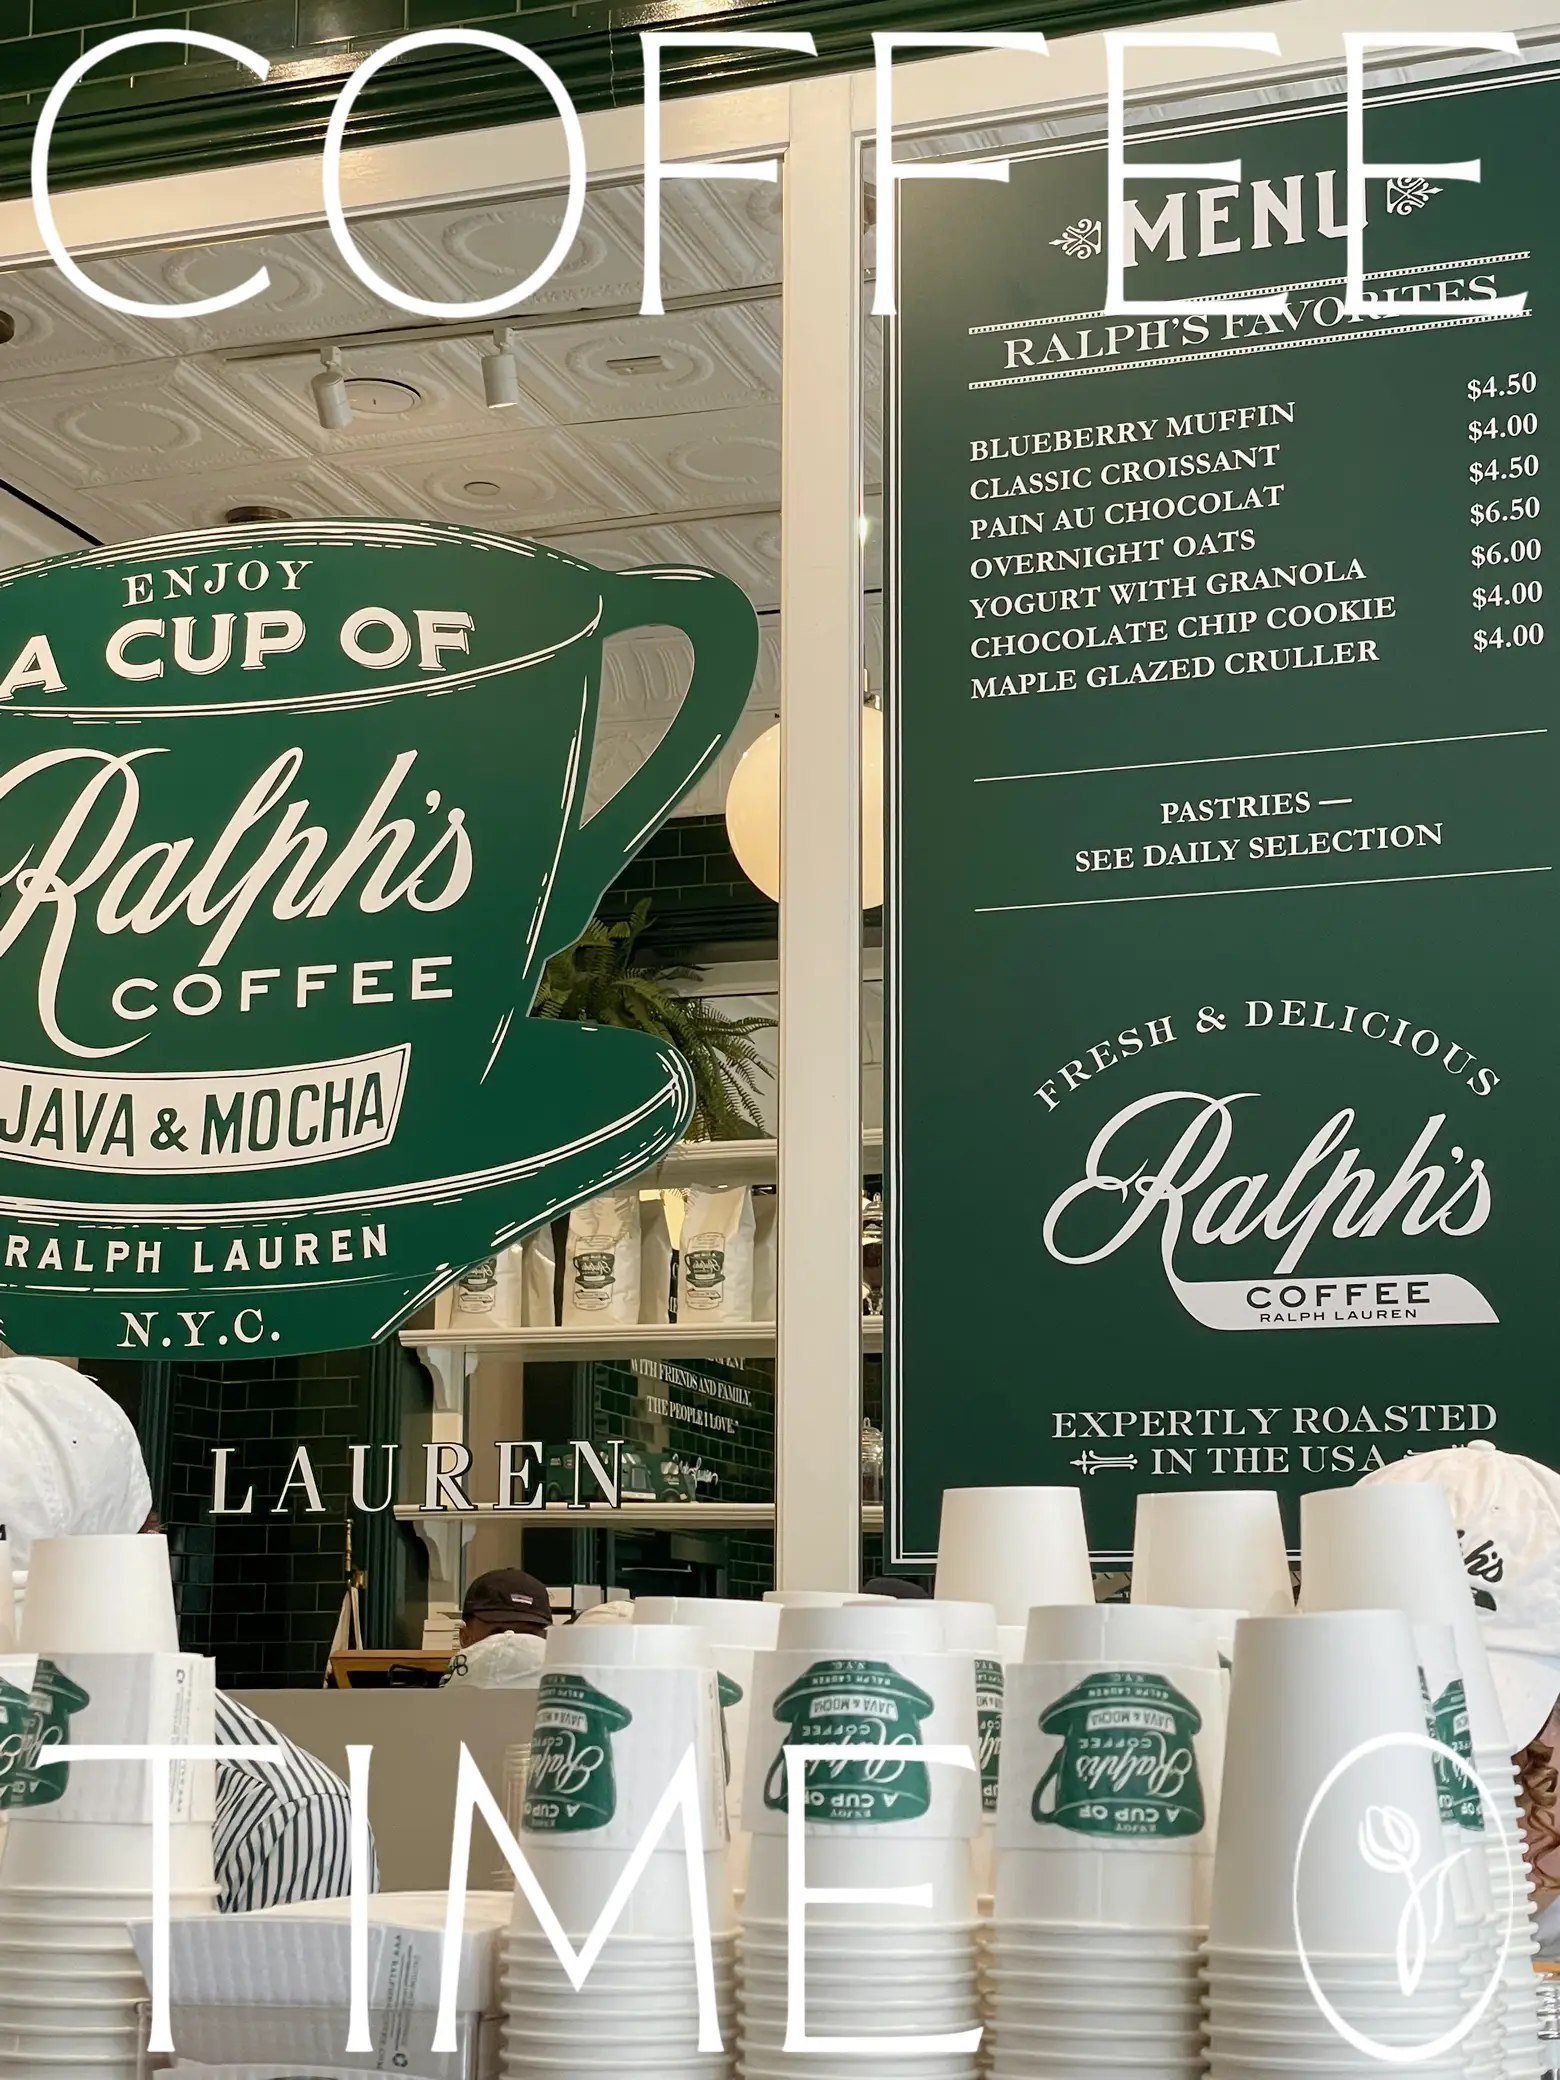 📍 RALPH’S COFFEE's images